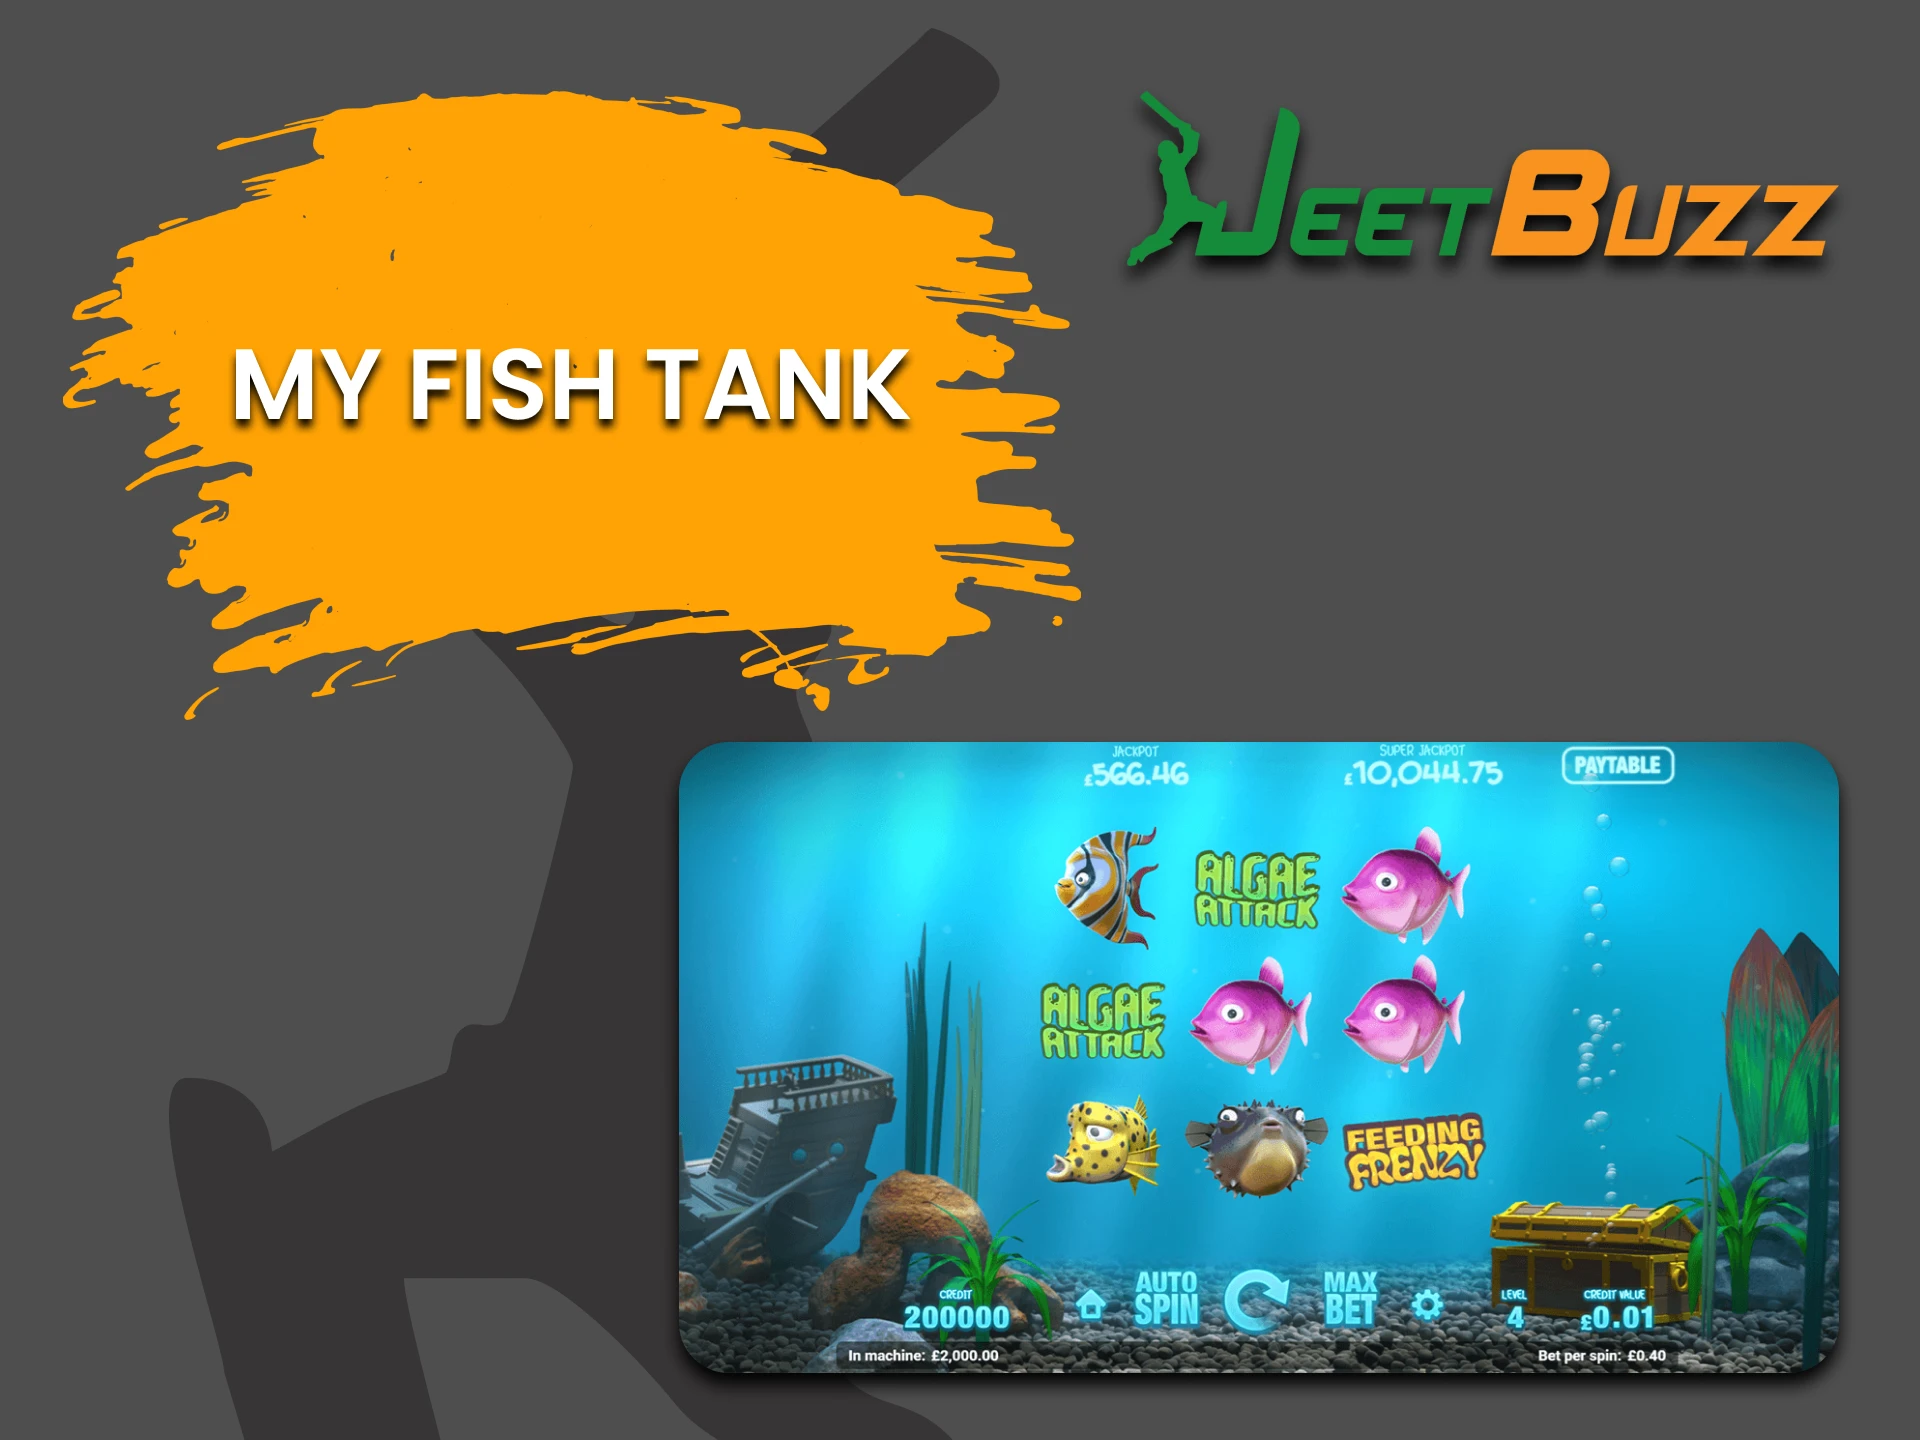 Try your hand at My Fish Tank on JeetBuzz.